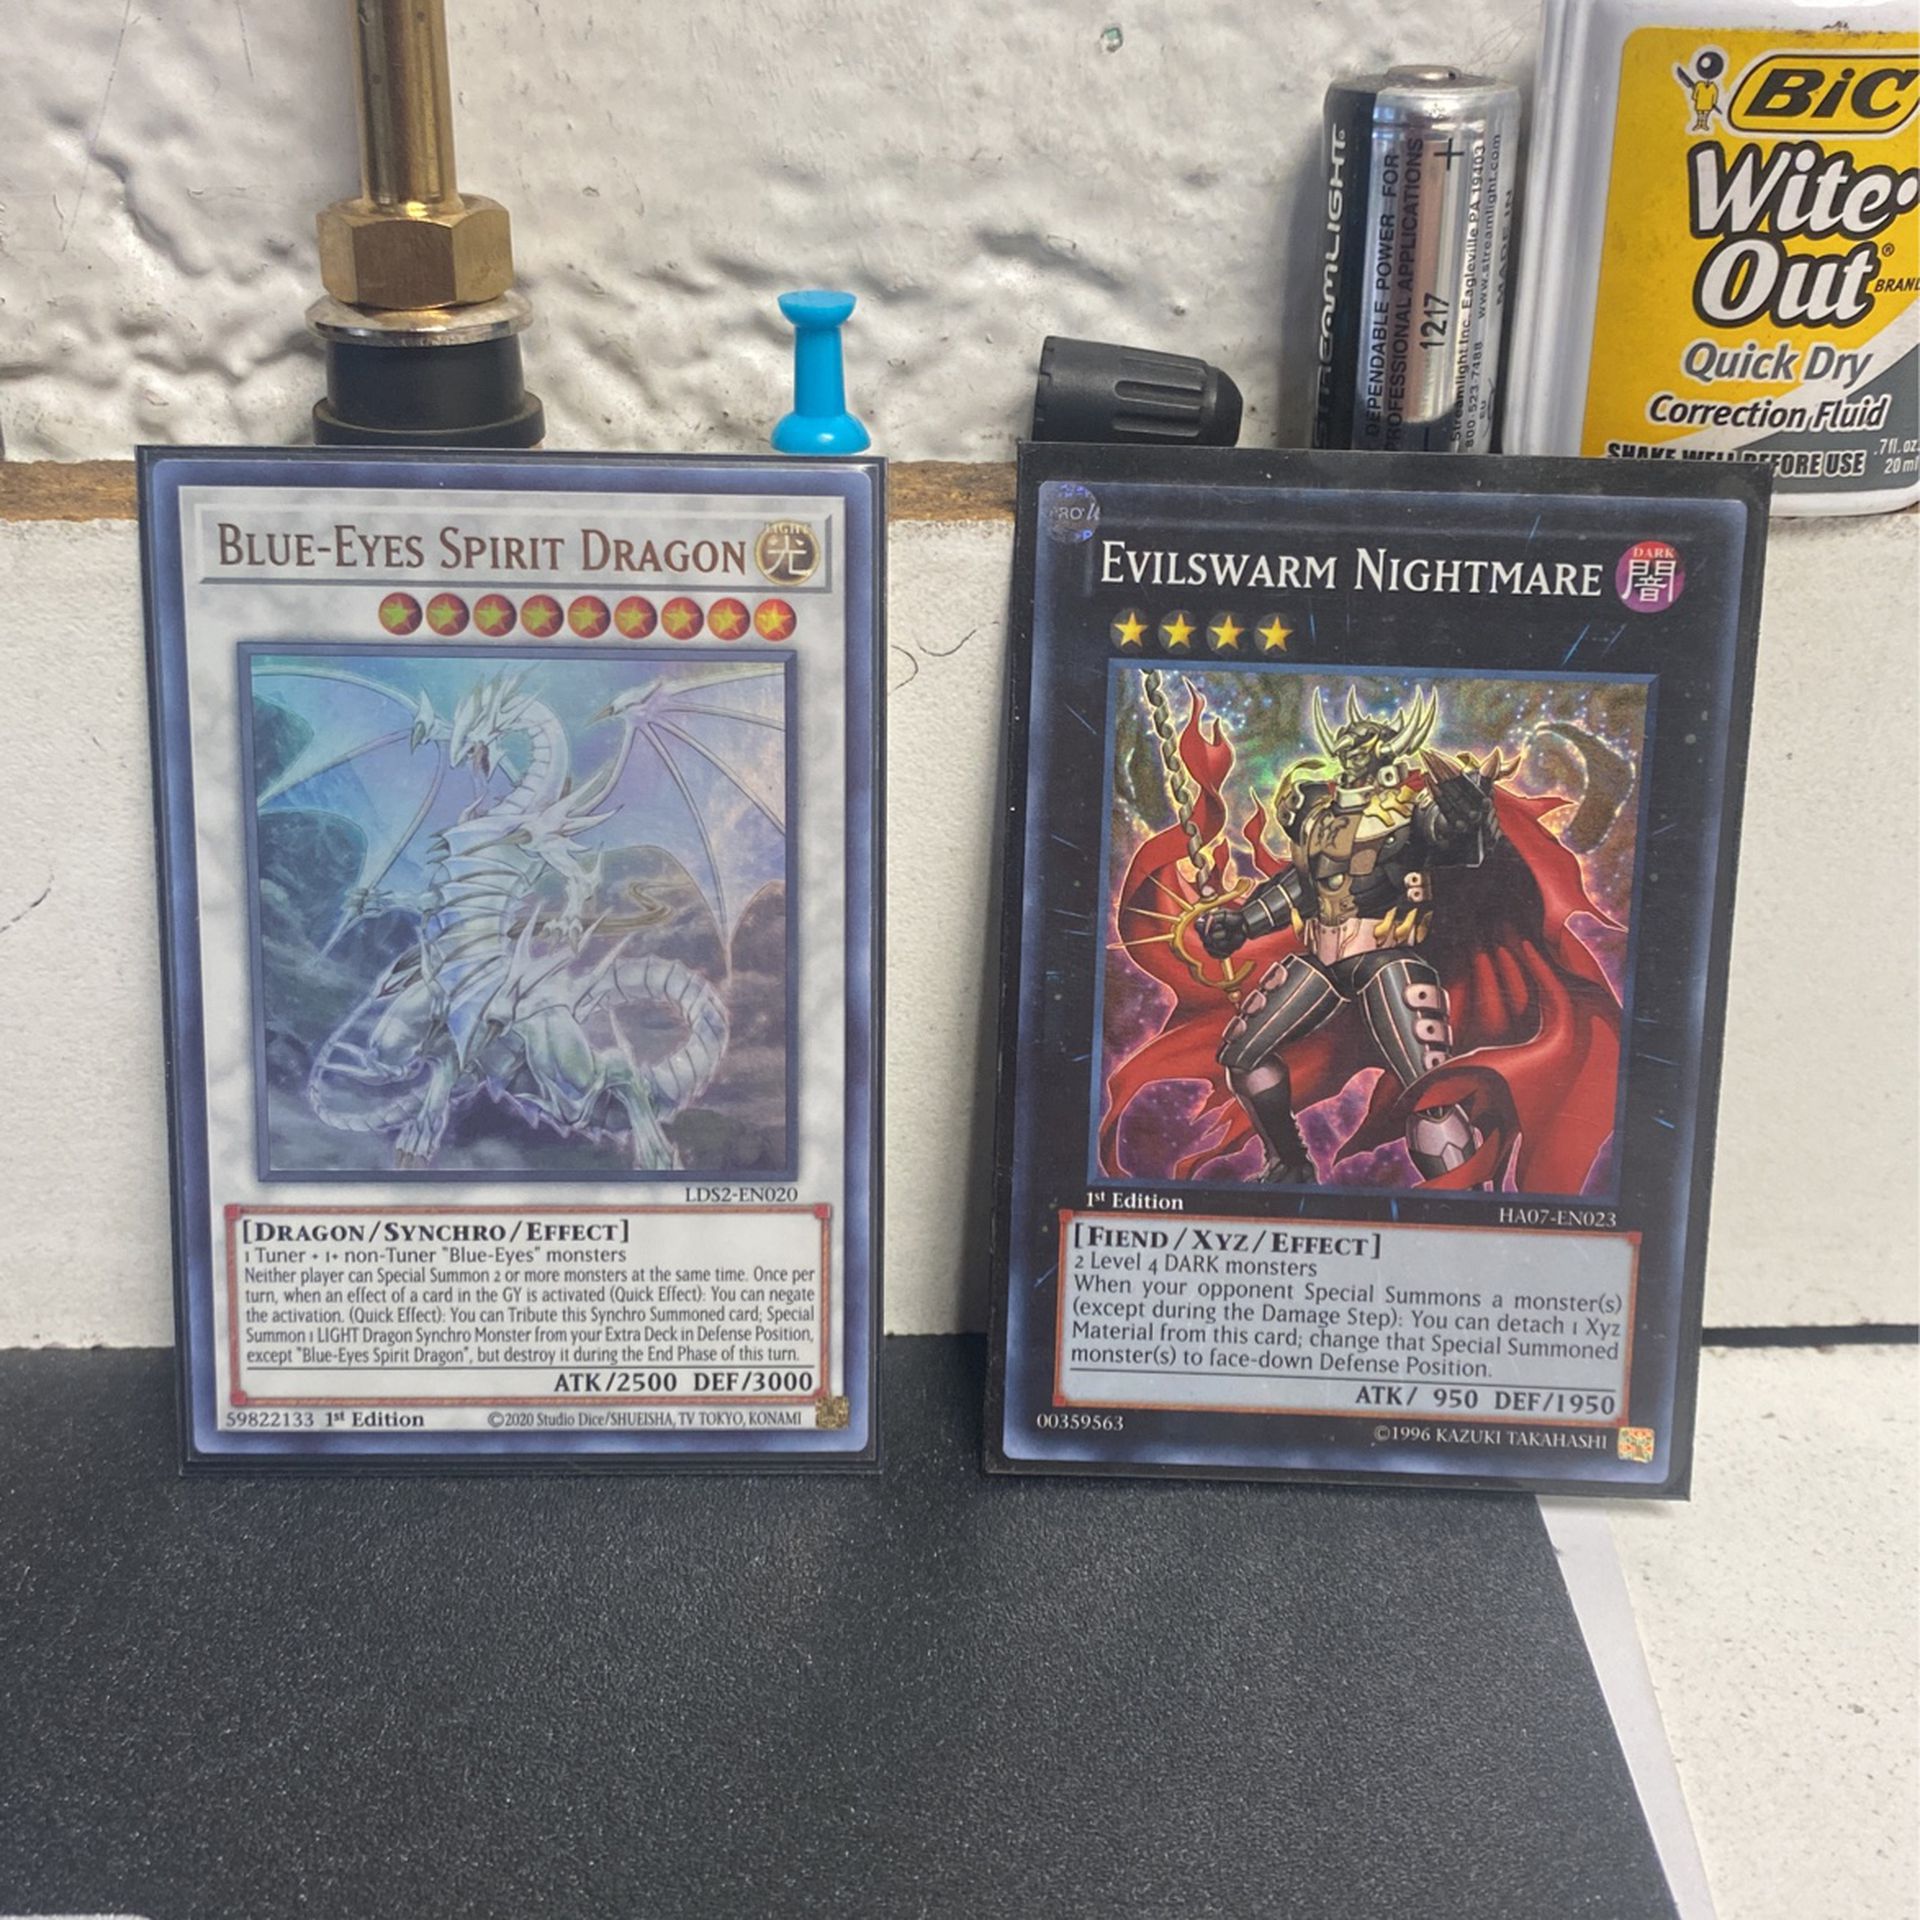 4 Yugioh cards for the Low!